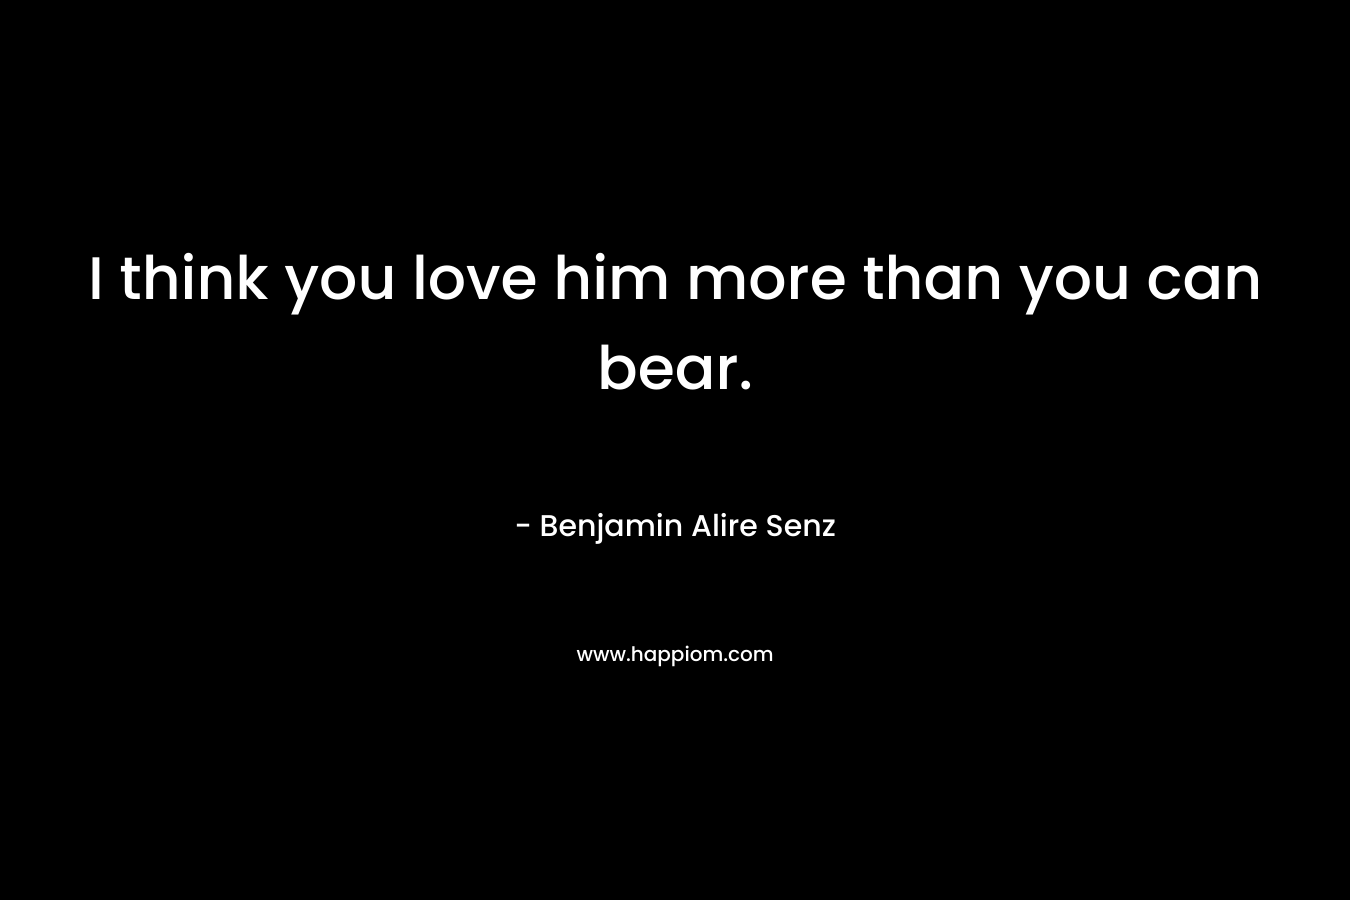 I think you love him more than you can bear.